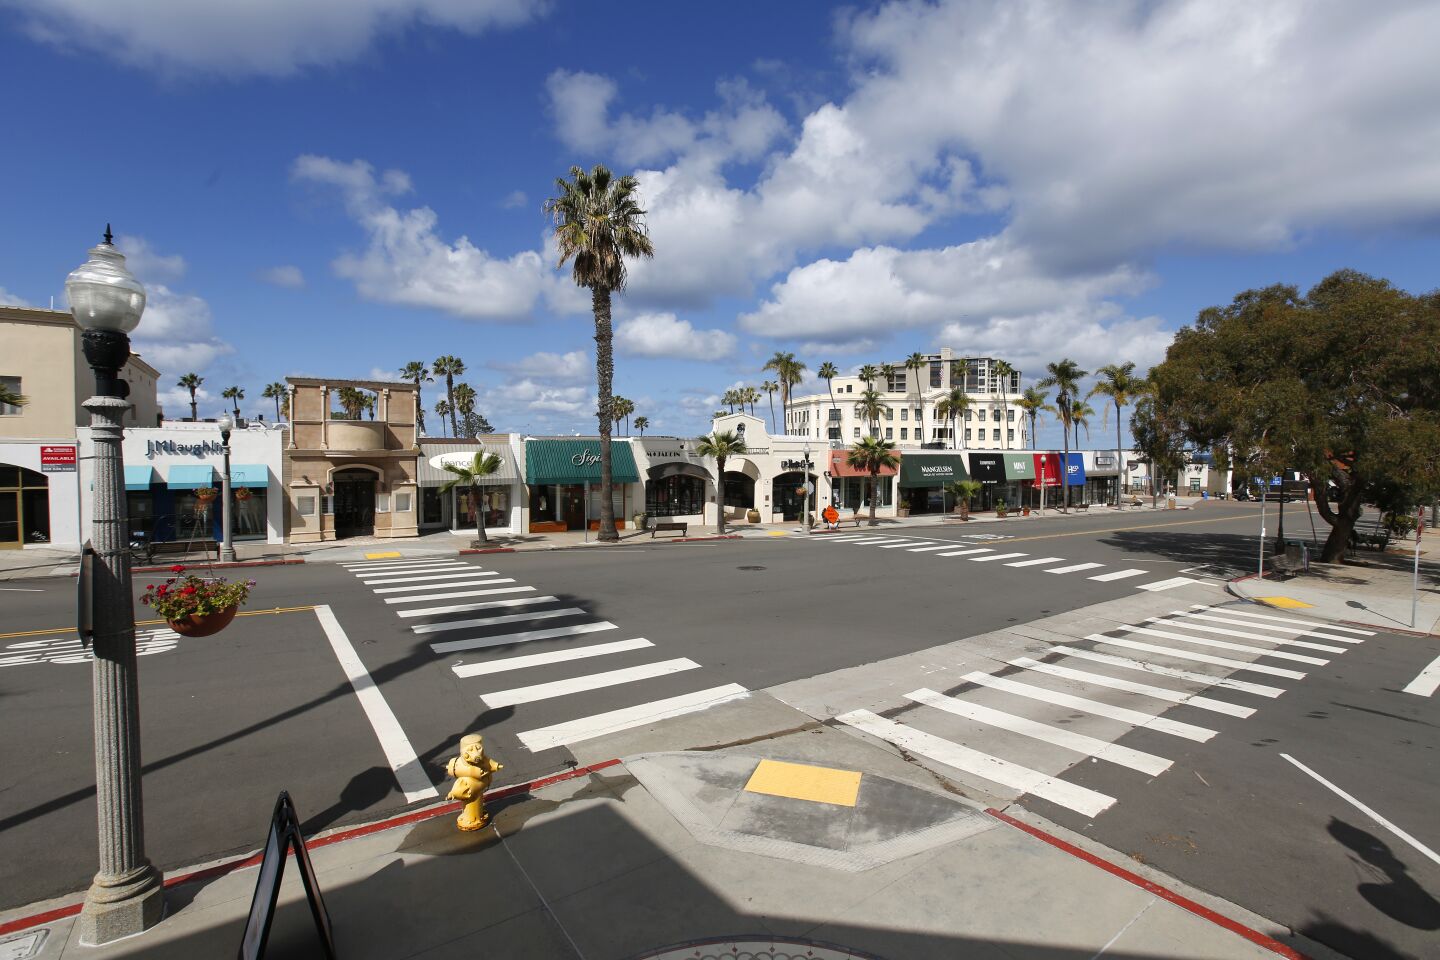 The normally busy Girard Ave. in La Jolla Village is cleared out because of the coronavirus, shown here on March 26, 2020.